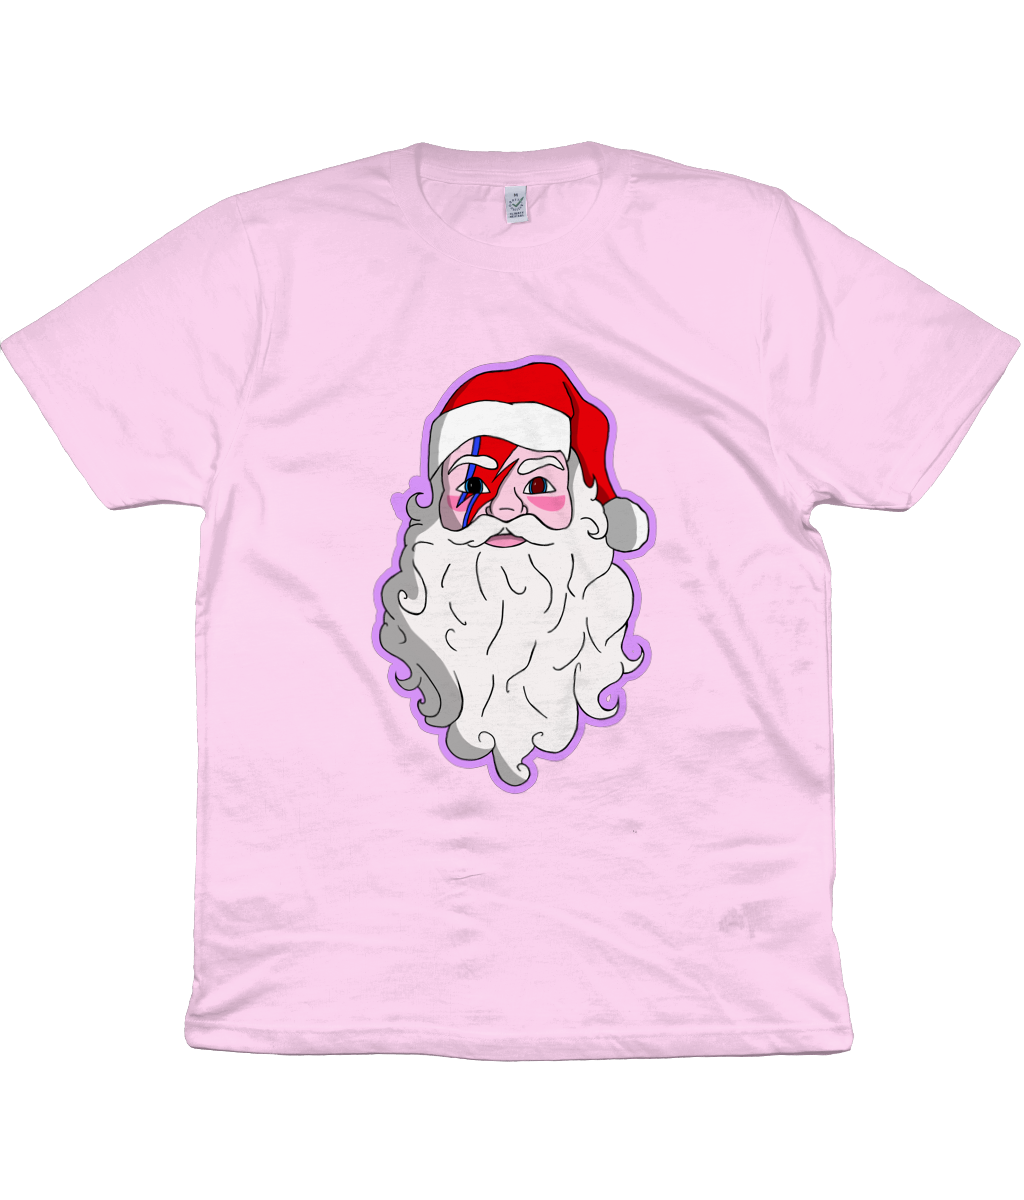 EP01 Classic Jersey Unisex T-Shirt santa by oliviabeckettdesigns